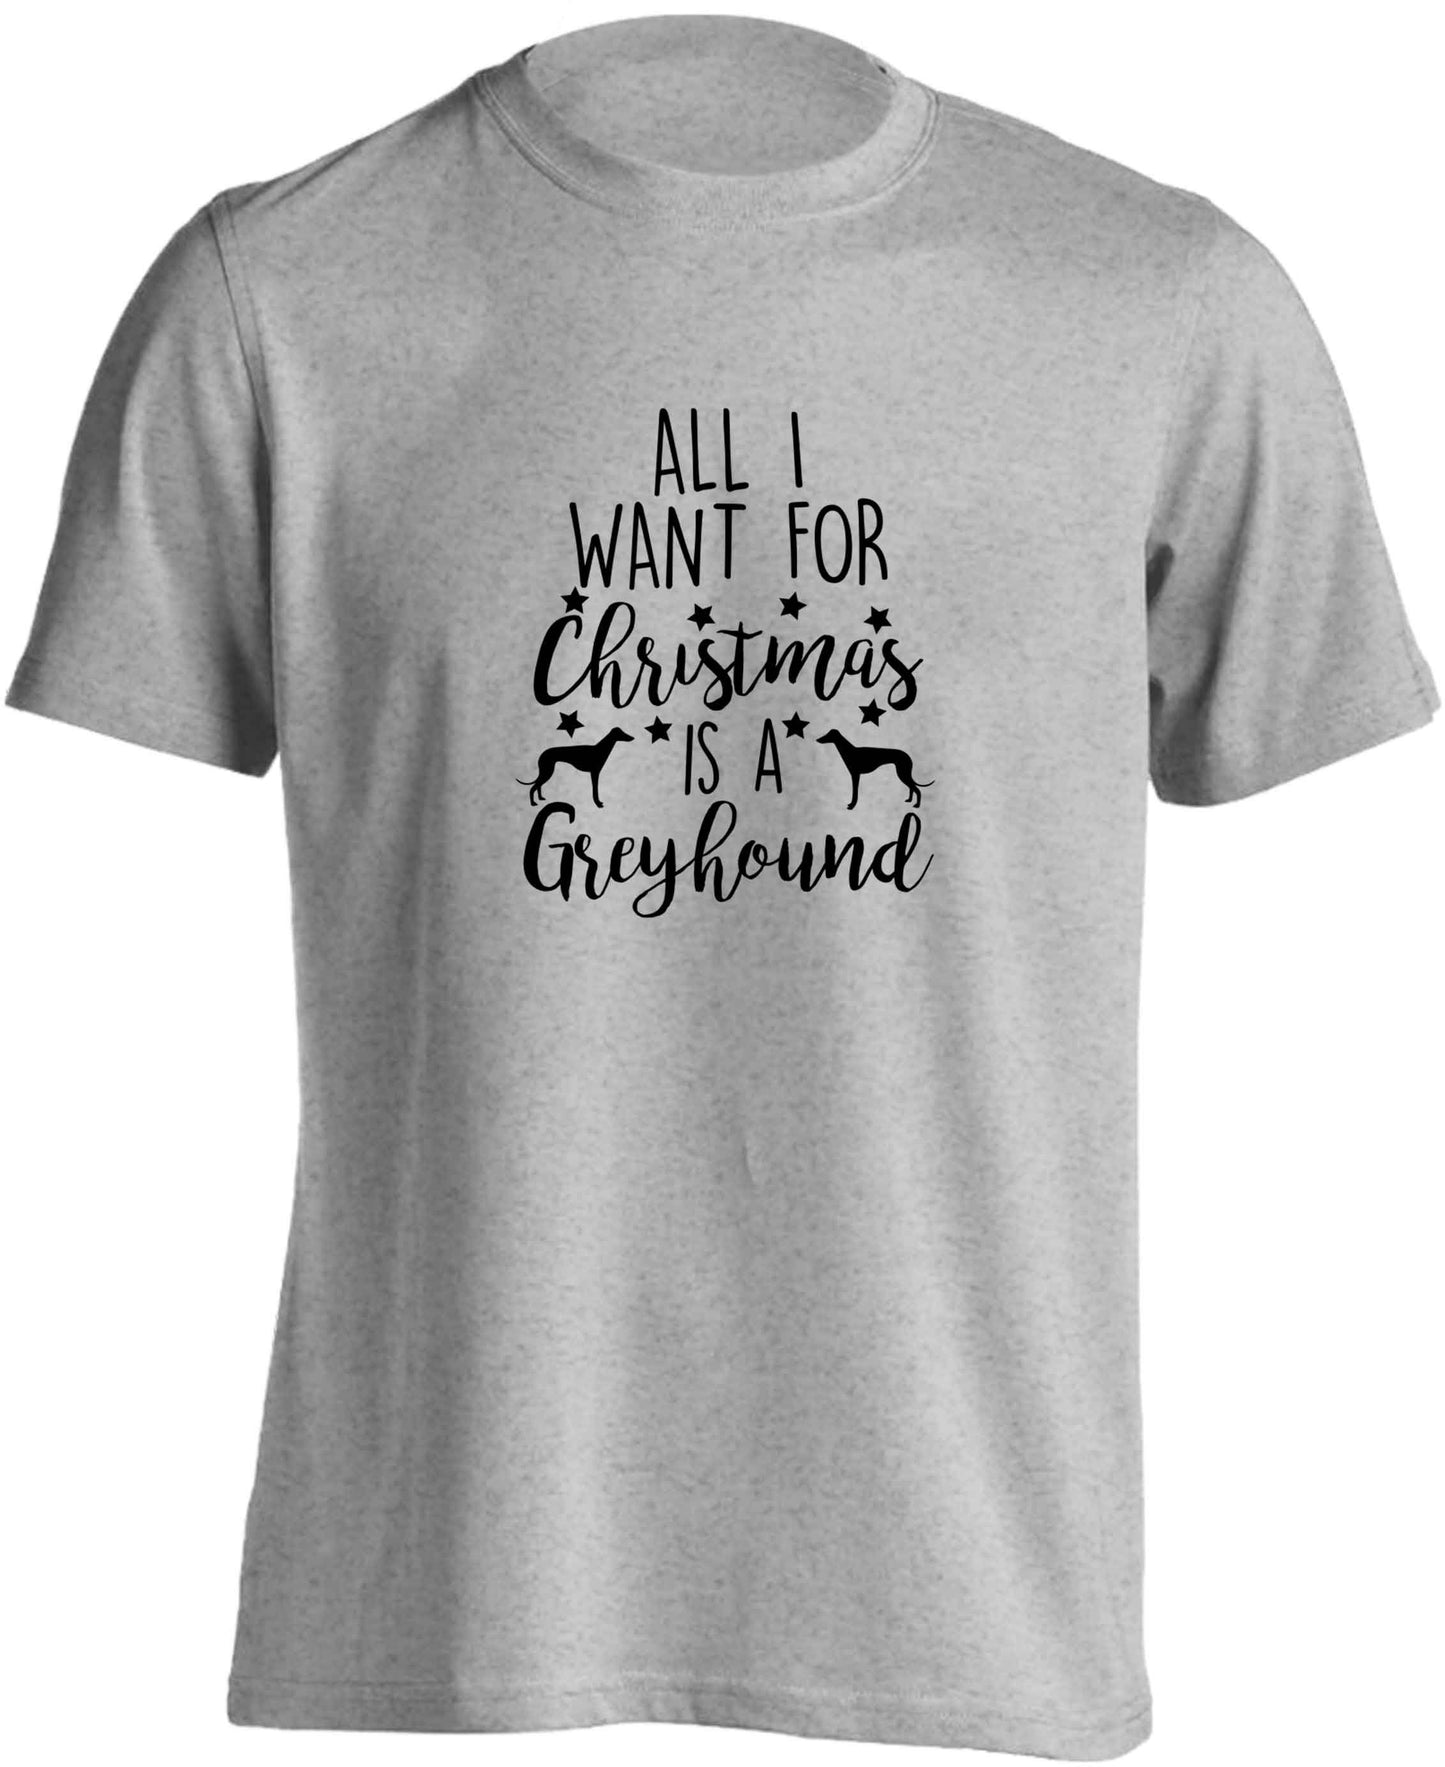 All I want for Christmas is a greyhound adults unisex grey Tshirt 2XL